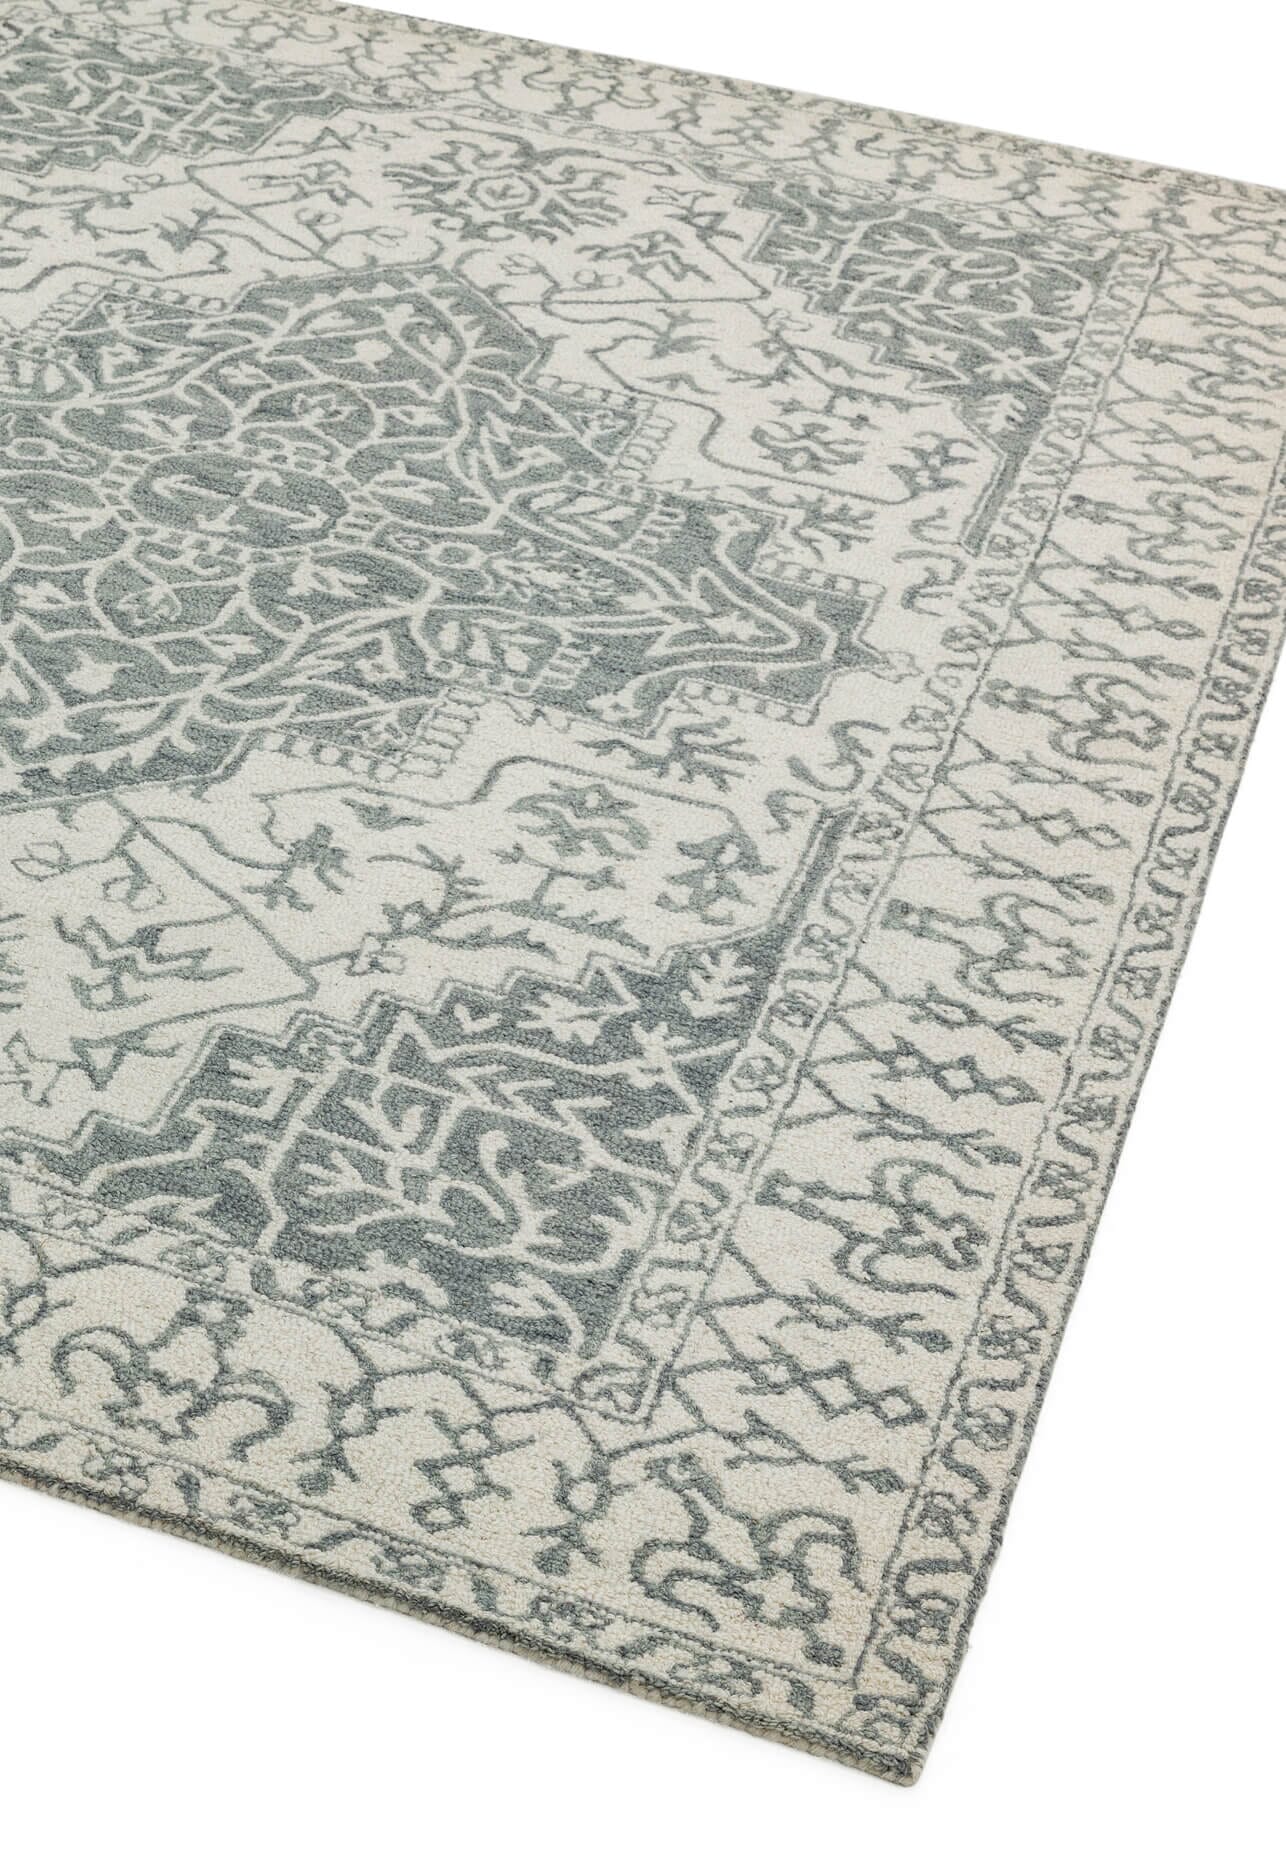  Asiatic Carpets-Asiatic Carpets Bronte Fine Loop Hand Tufted Rug Silver Grey - 200 x 290cm-Beige, Natural 677 